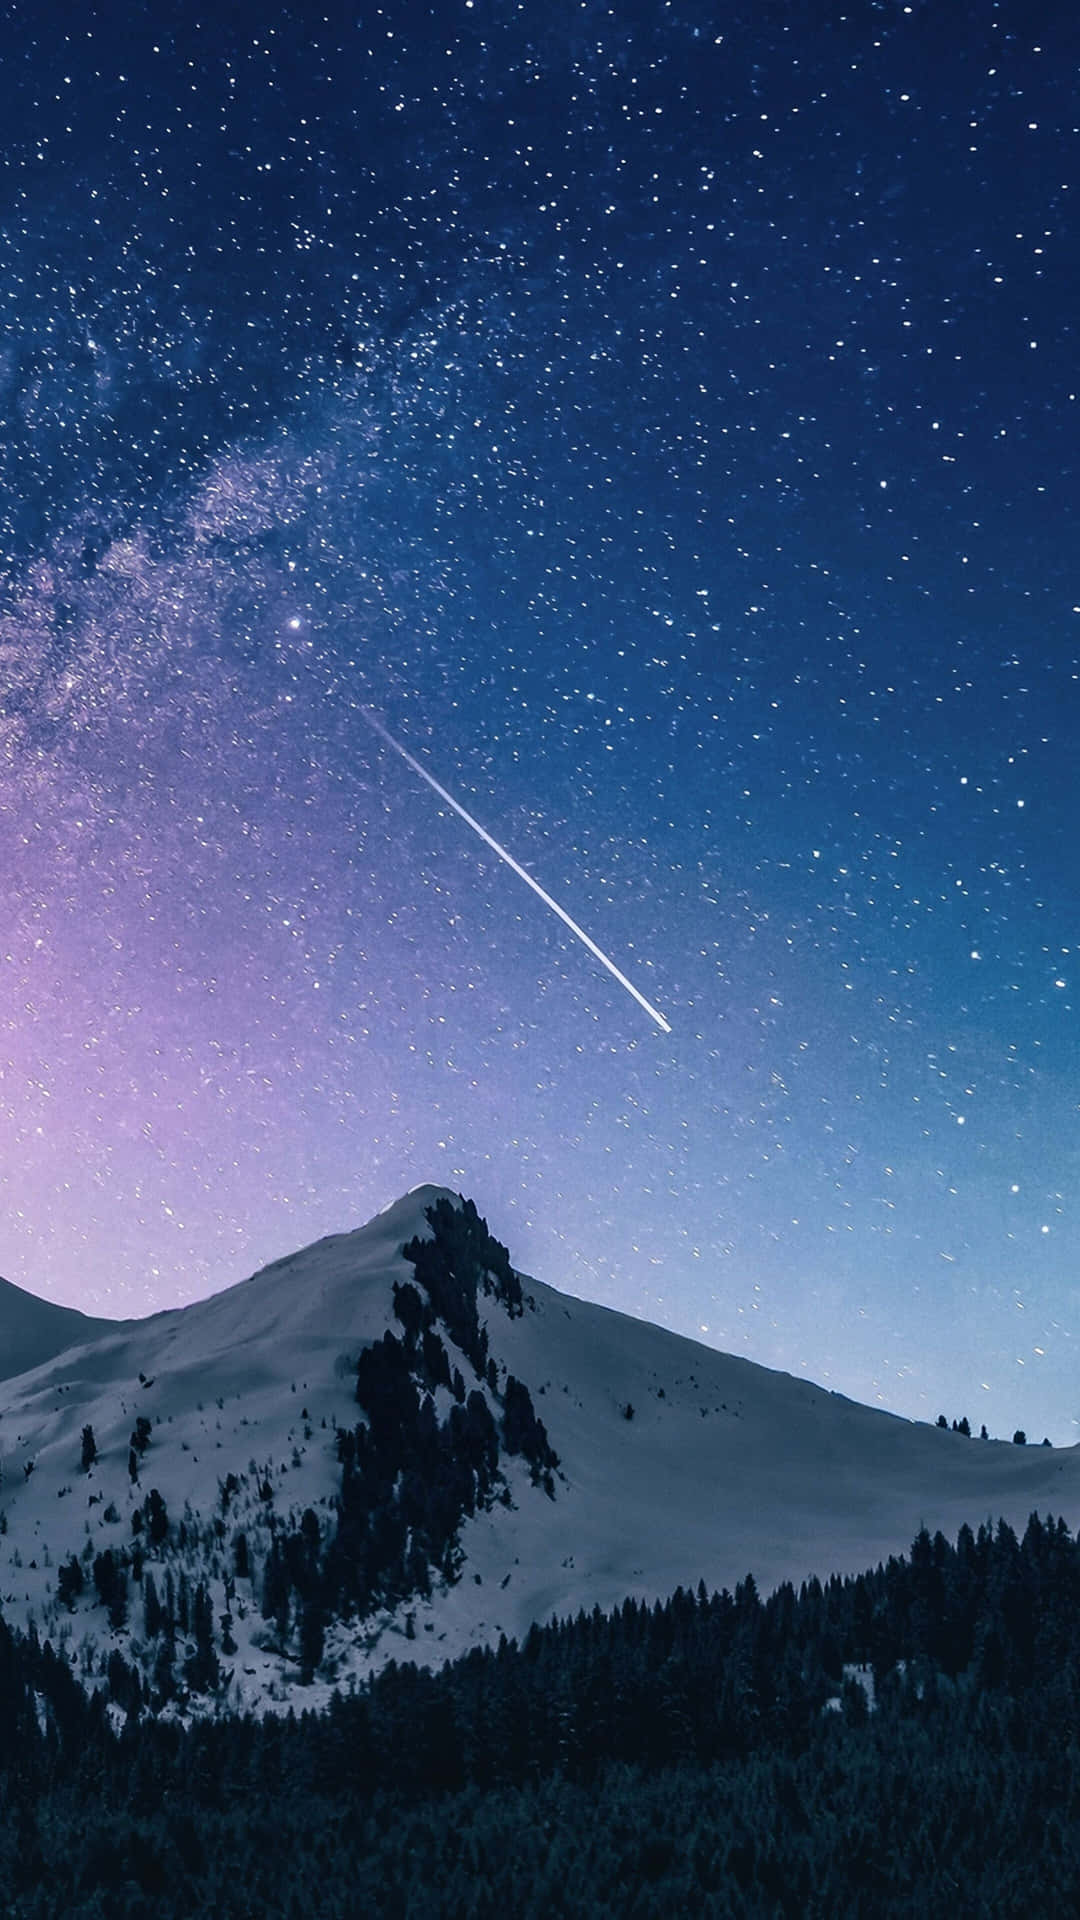 Star Sky With Snowy Mountain Wallpaper